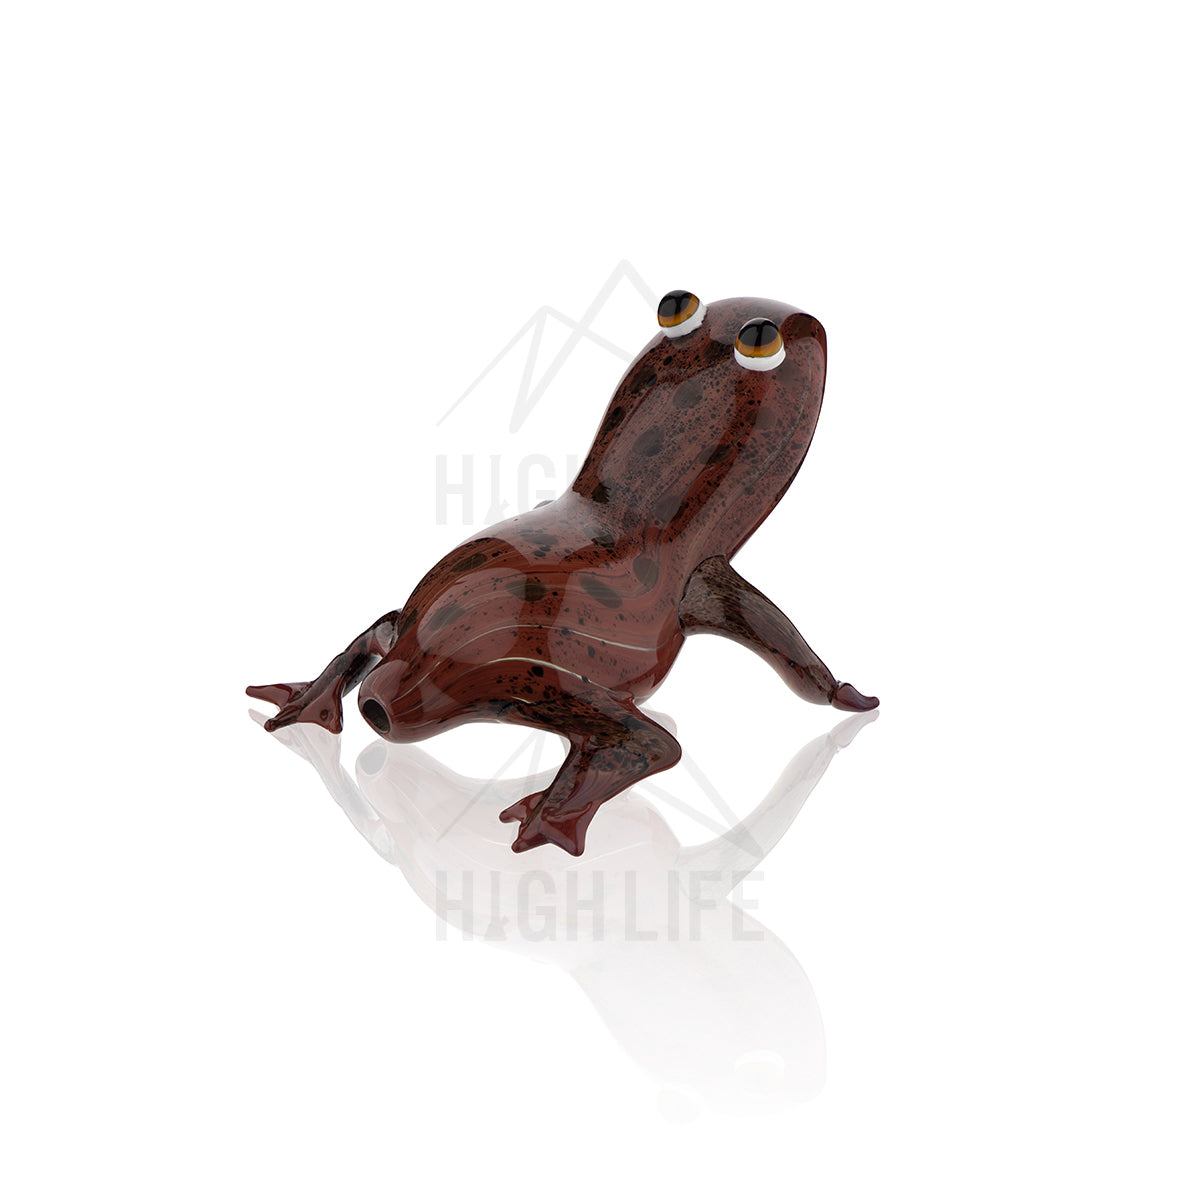 5" Red Frog Handpipe